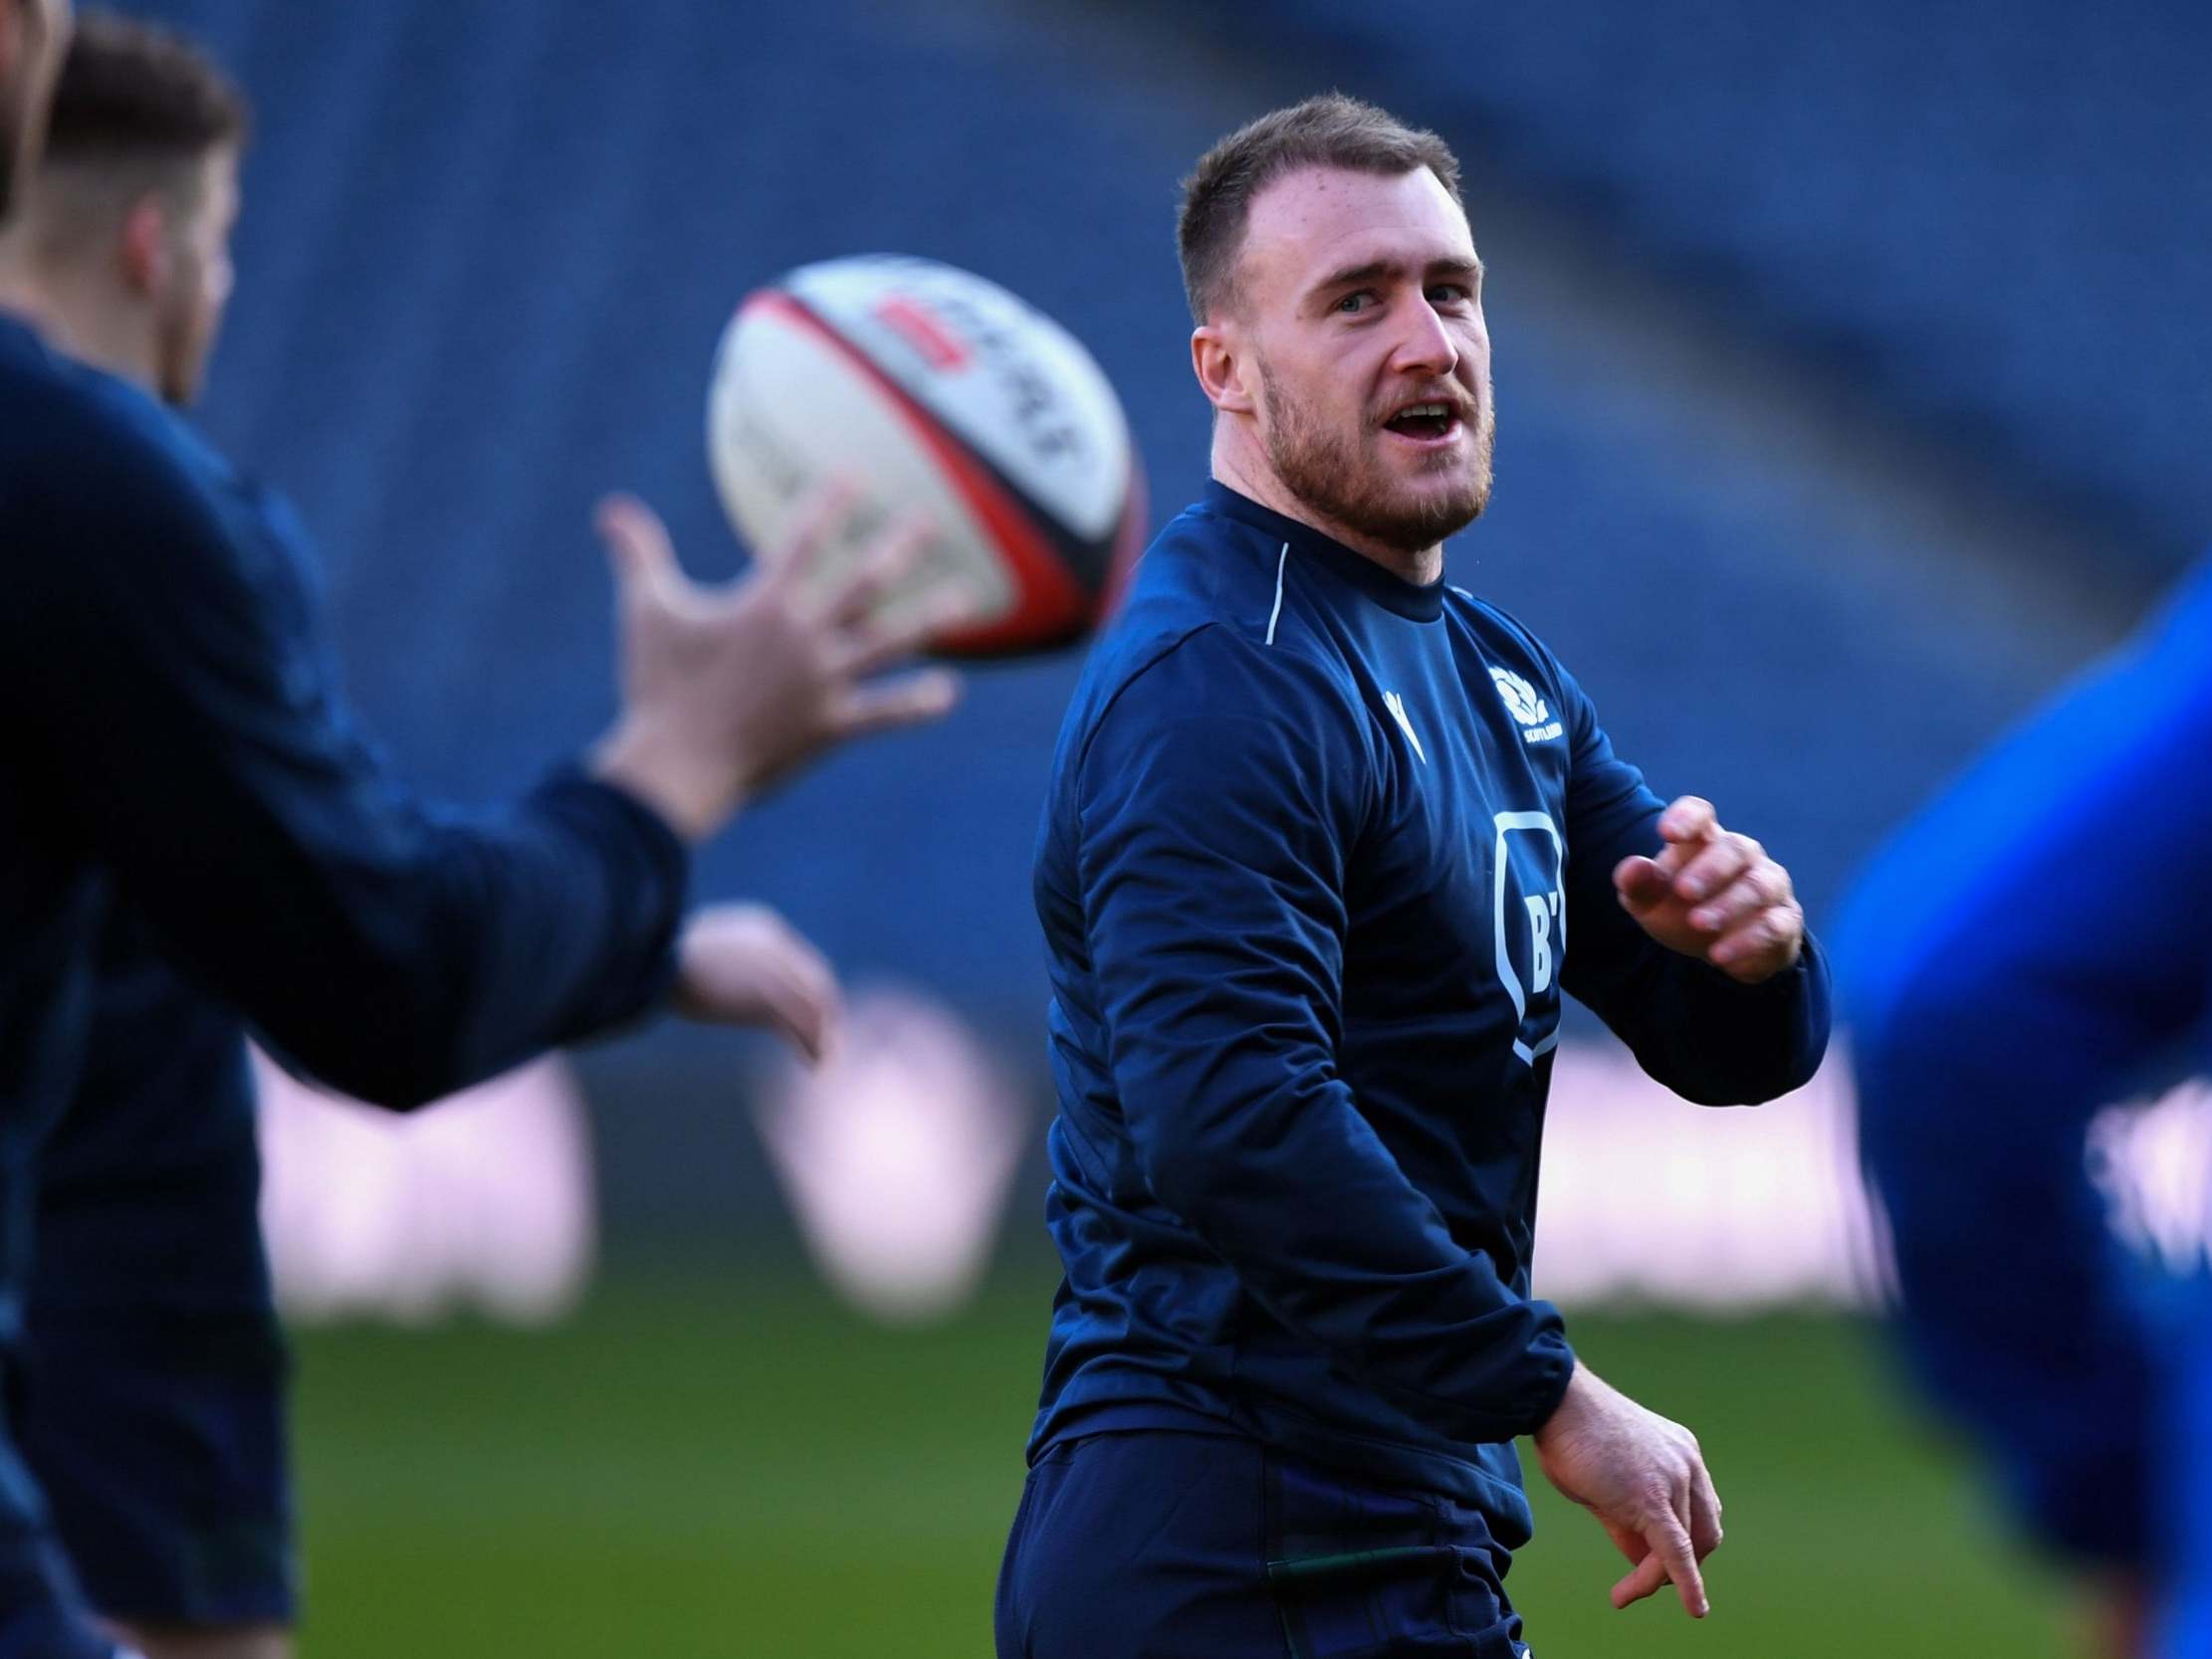 Stuart Hogg wants Scotland to rid themselves of their brave losers tag